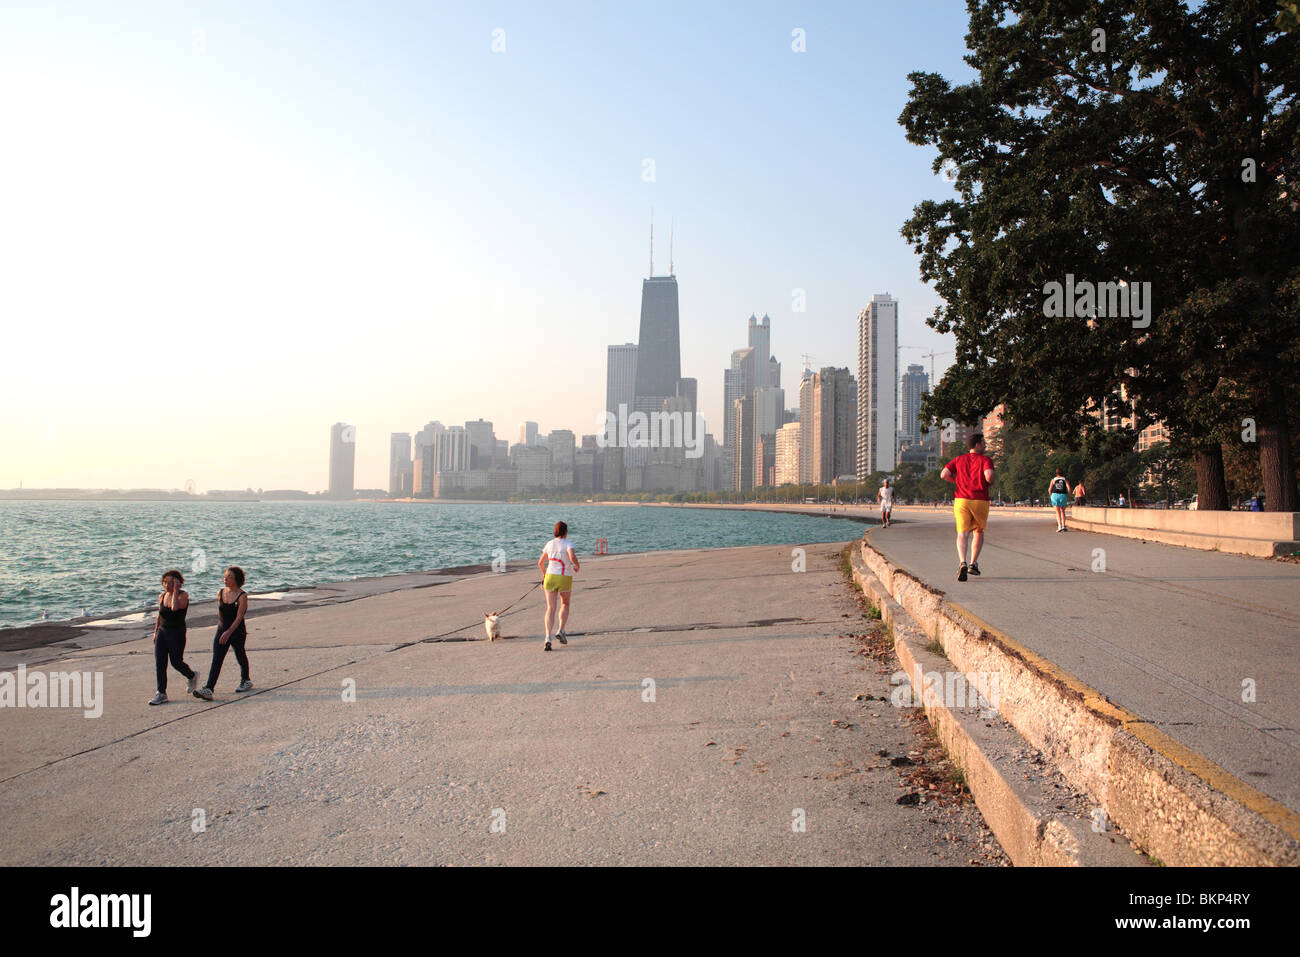 RUNNERS AND WALKERS AT CHICAGO DOWNTOWN LAKEFRONT  Stock Photo